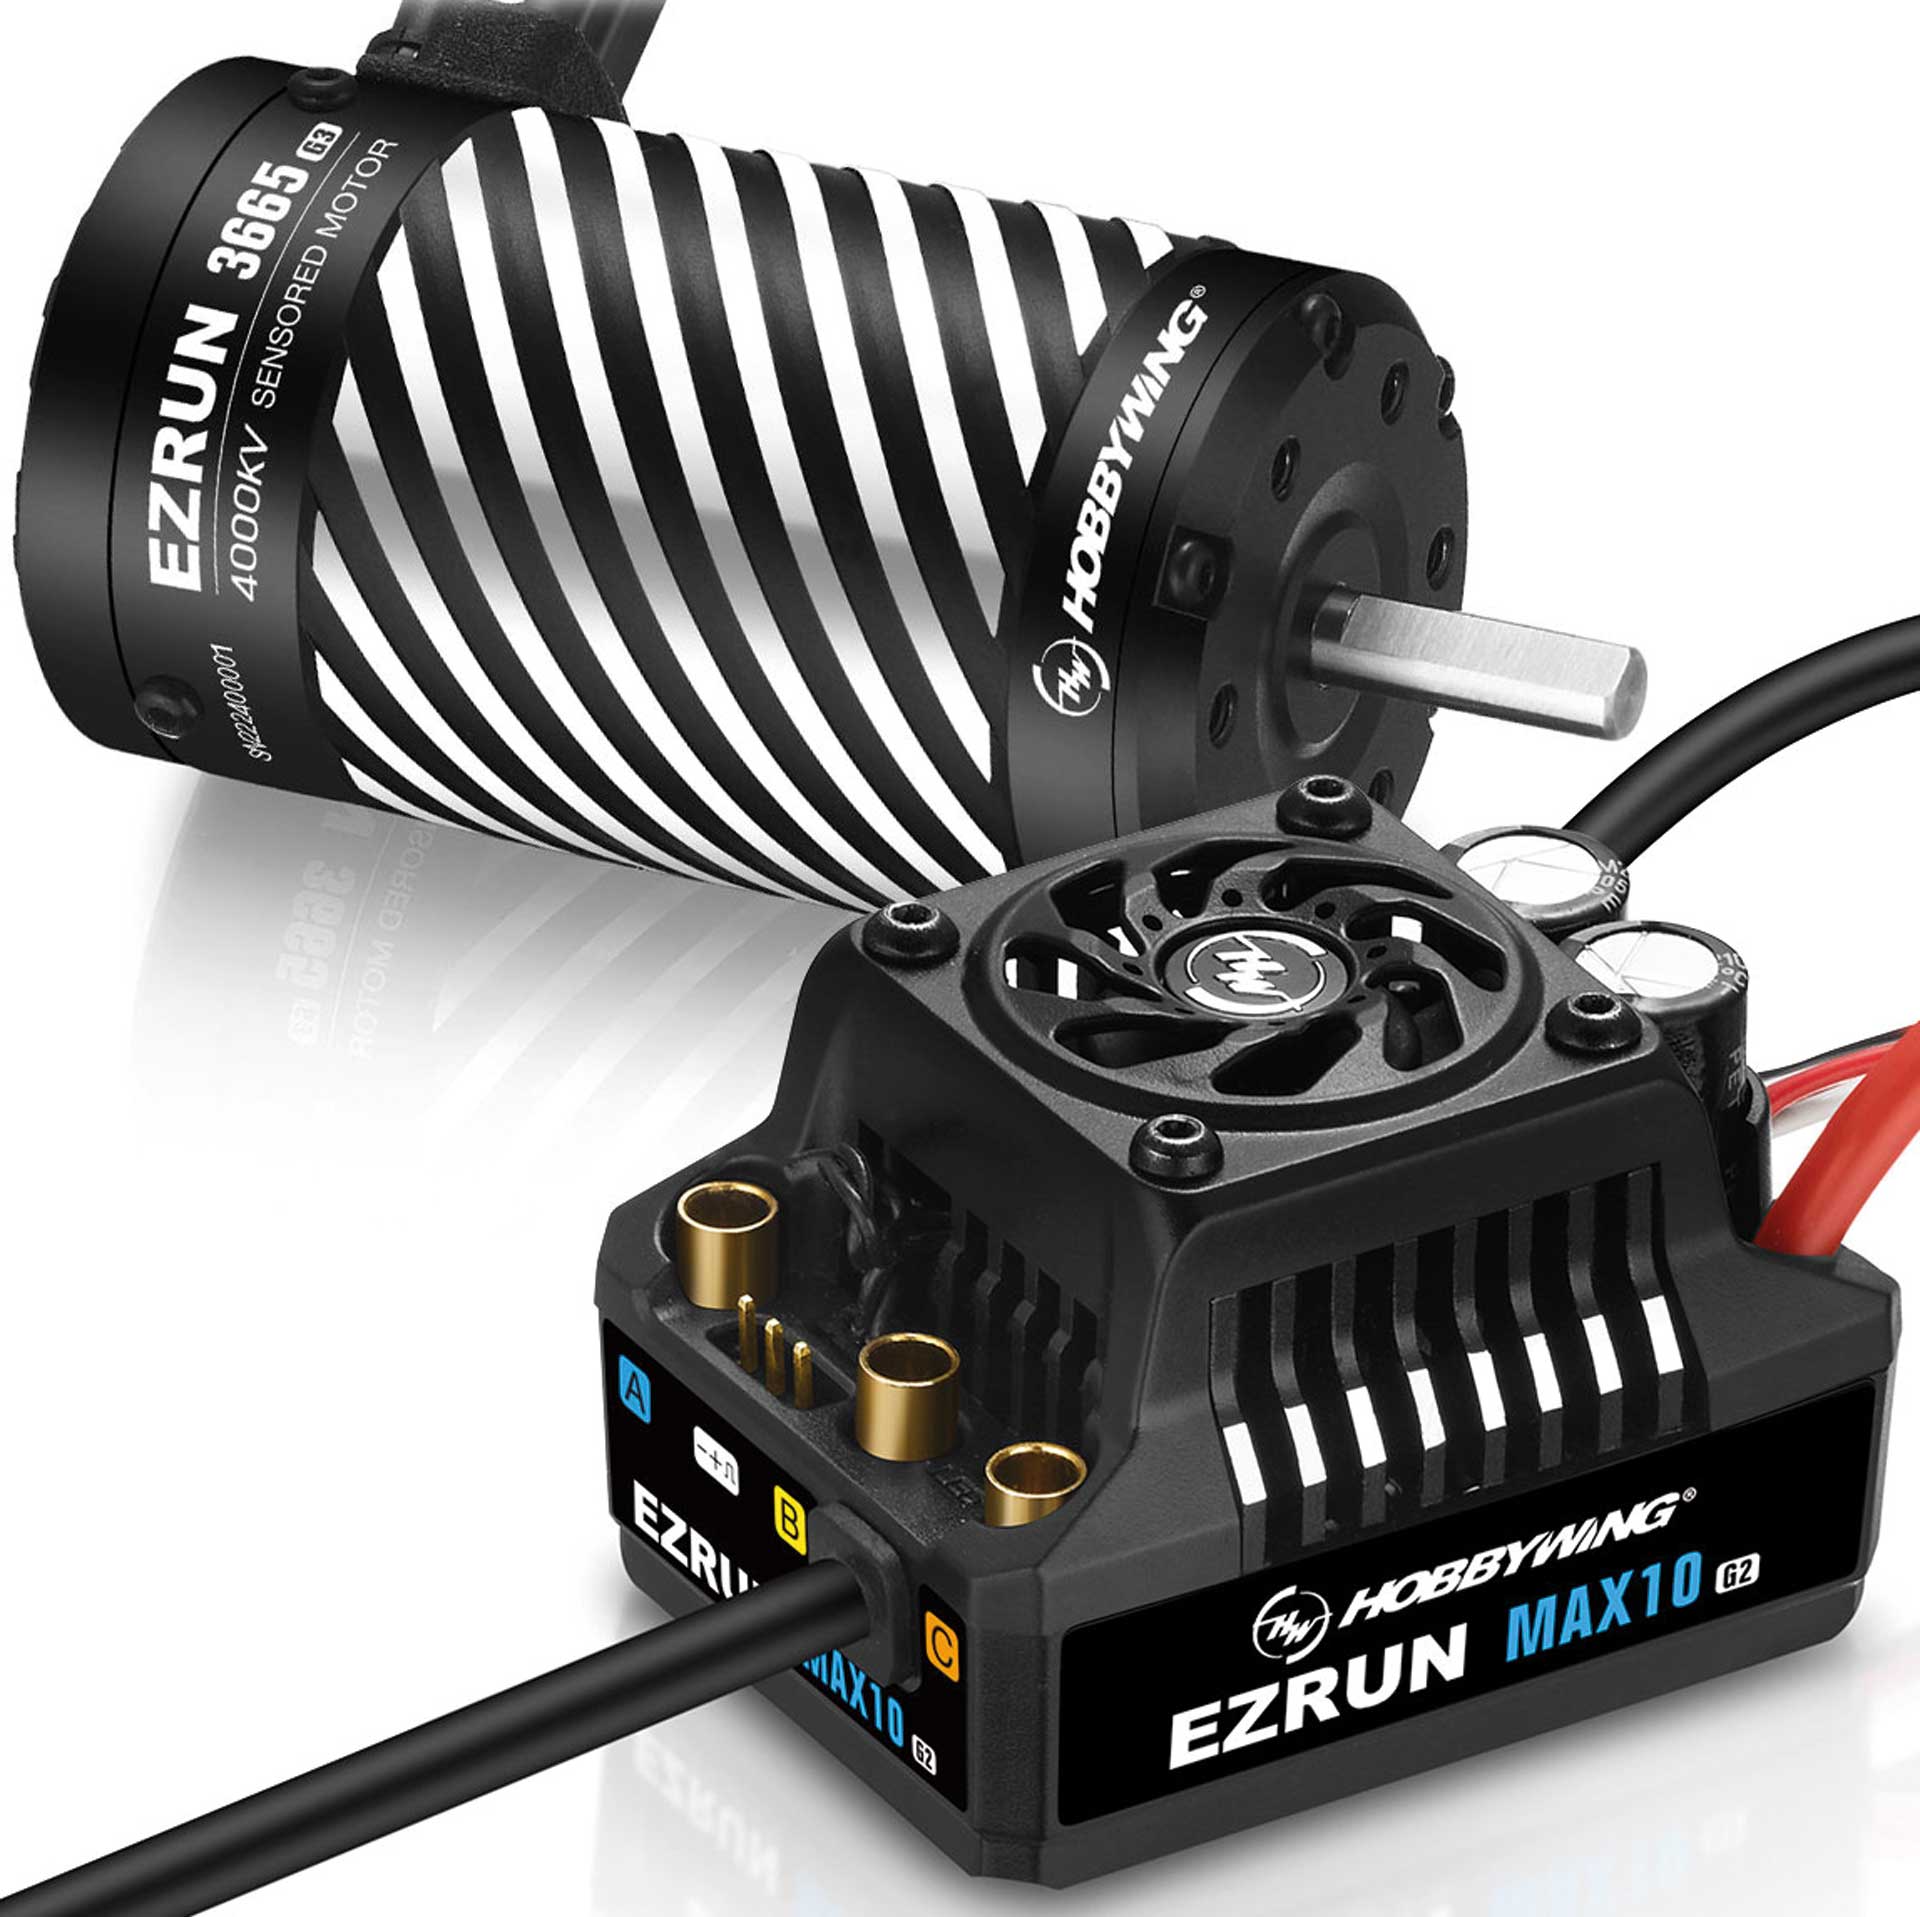 HOBBYWING Ezrun MAX10 G2 140A Combo with 3665SD 4000kV 5mm shaft